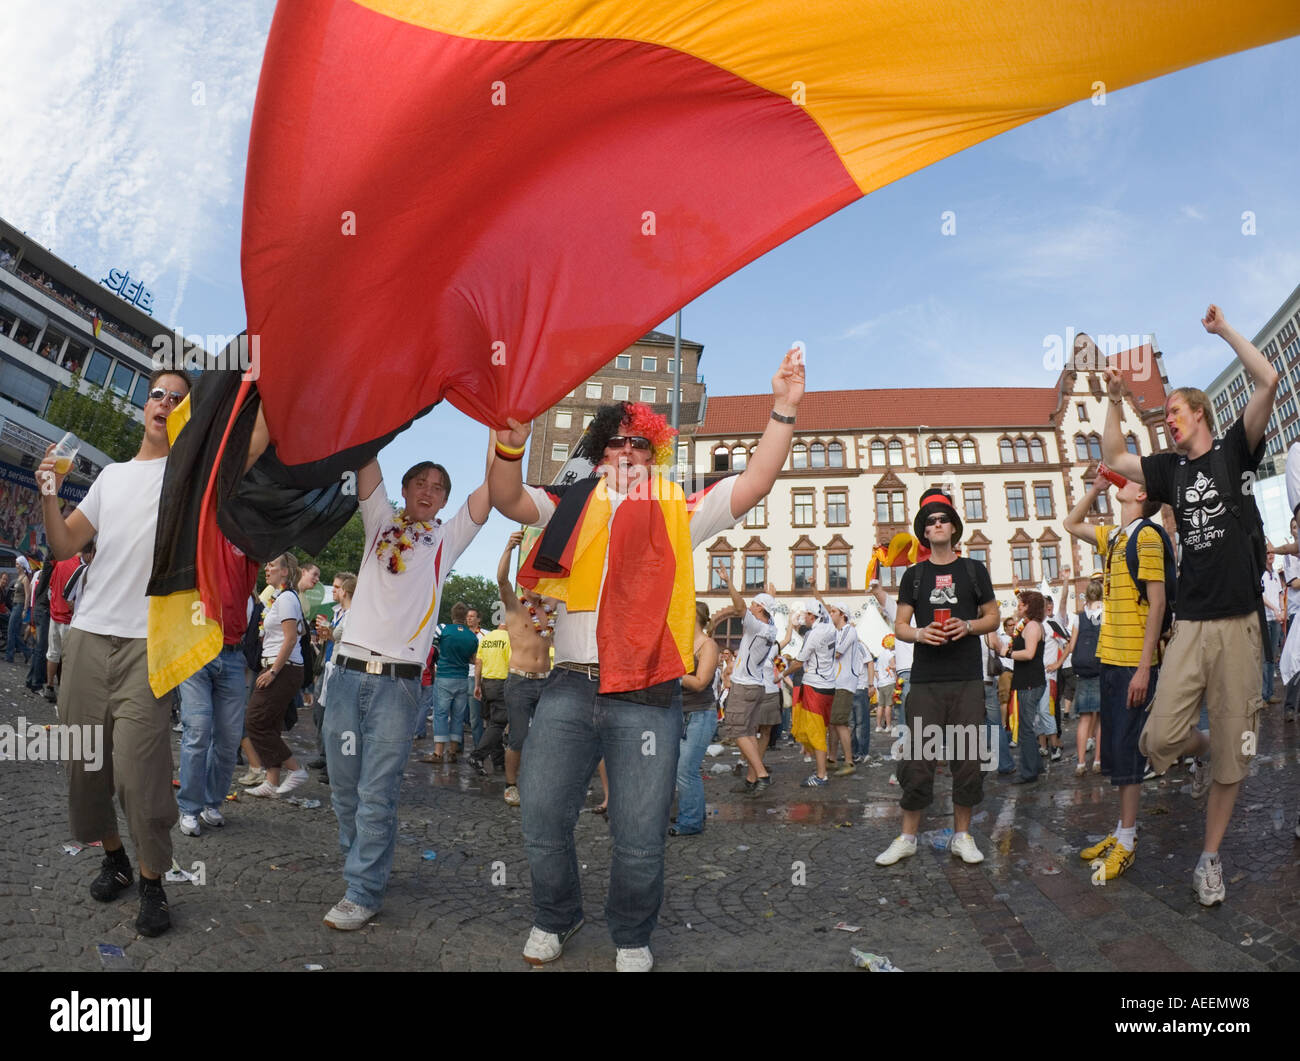 German football fans celebrating the victory of their team at a public viewing event Stock Photo